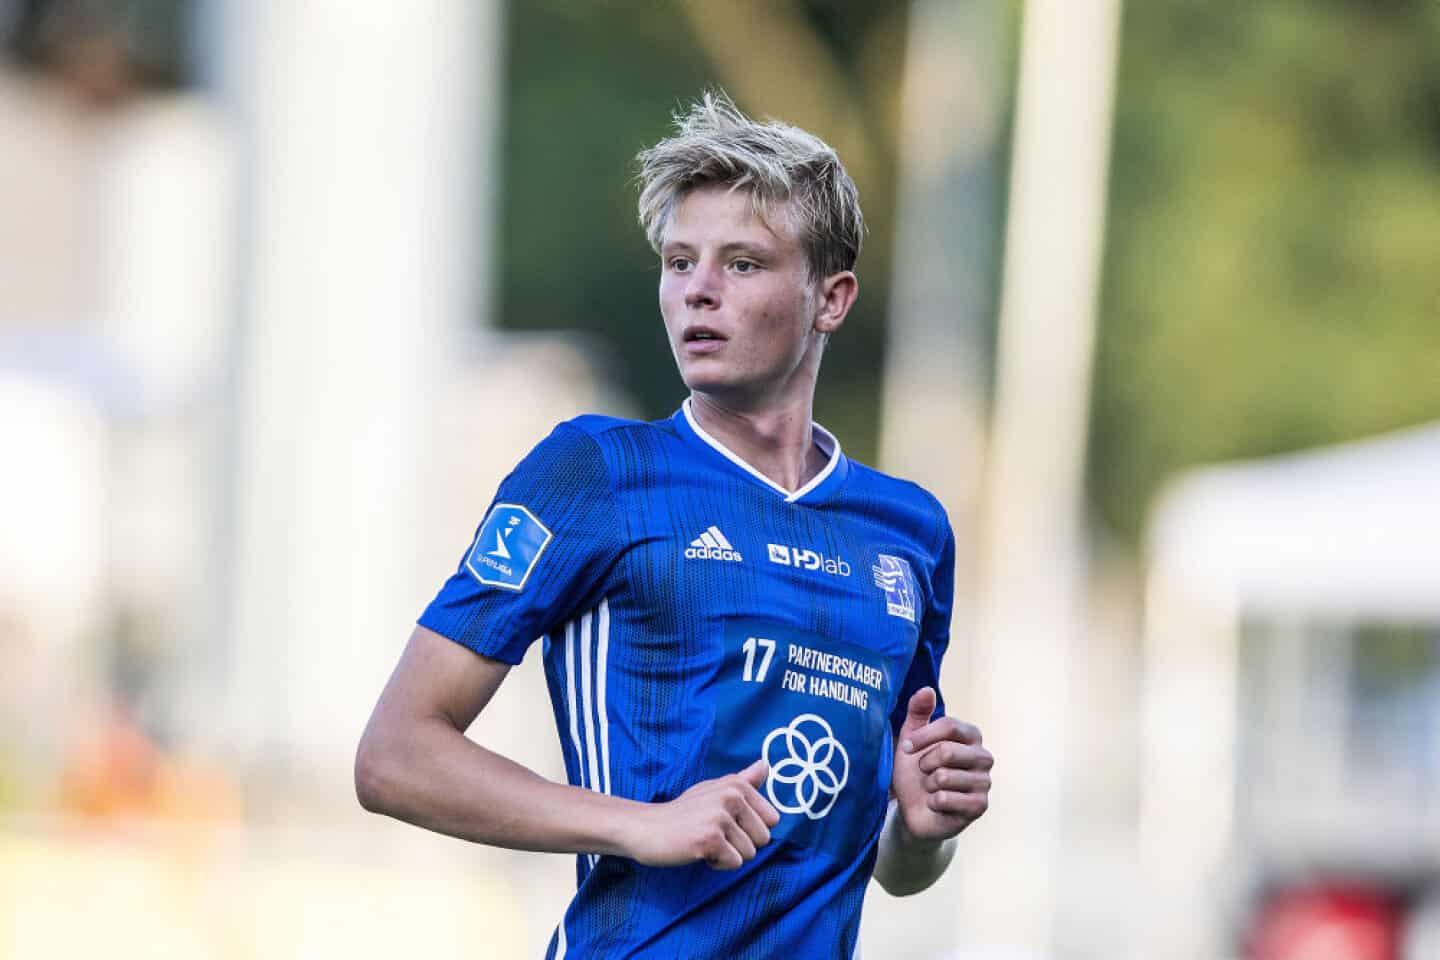 Image result for frederik winther footballer lyngby